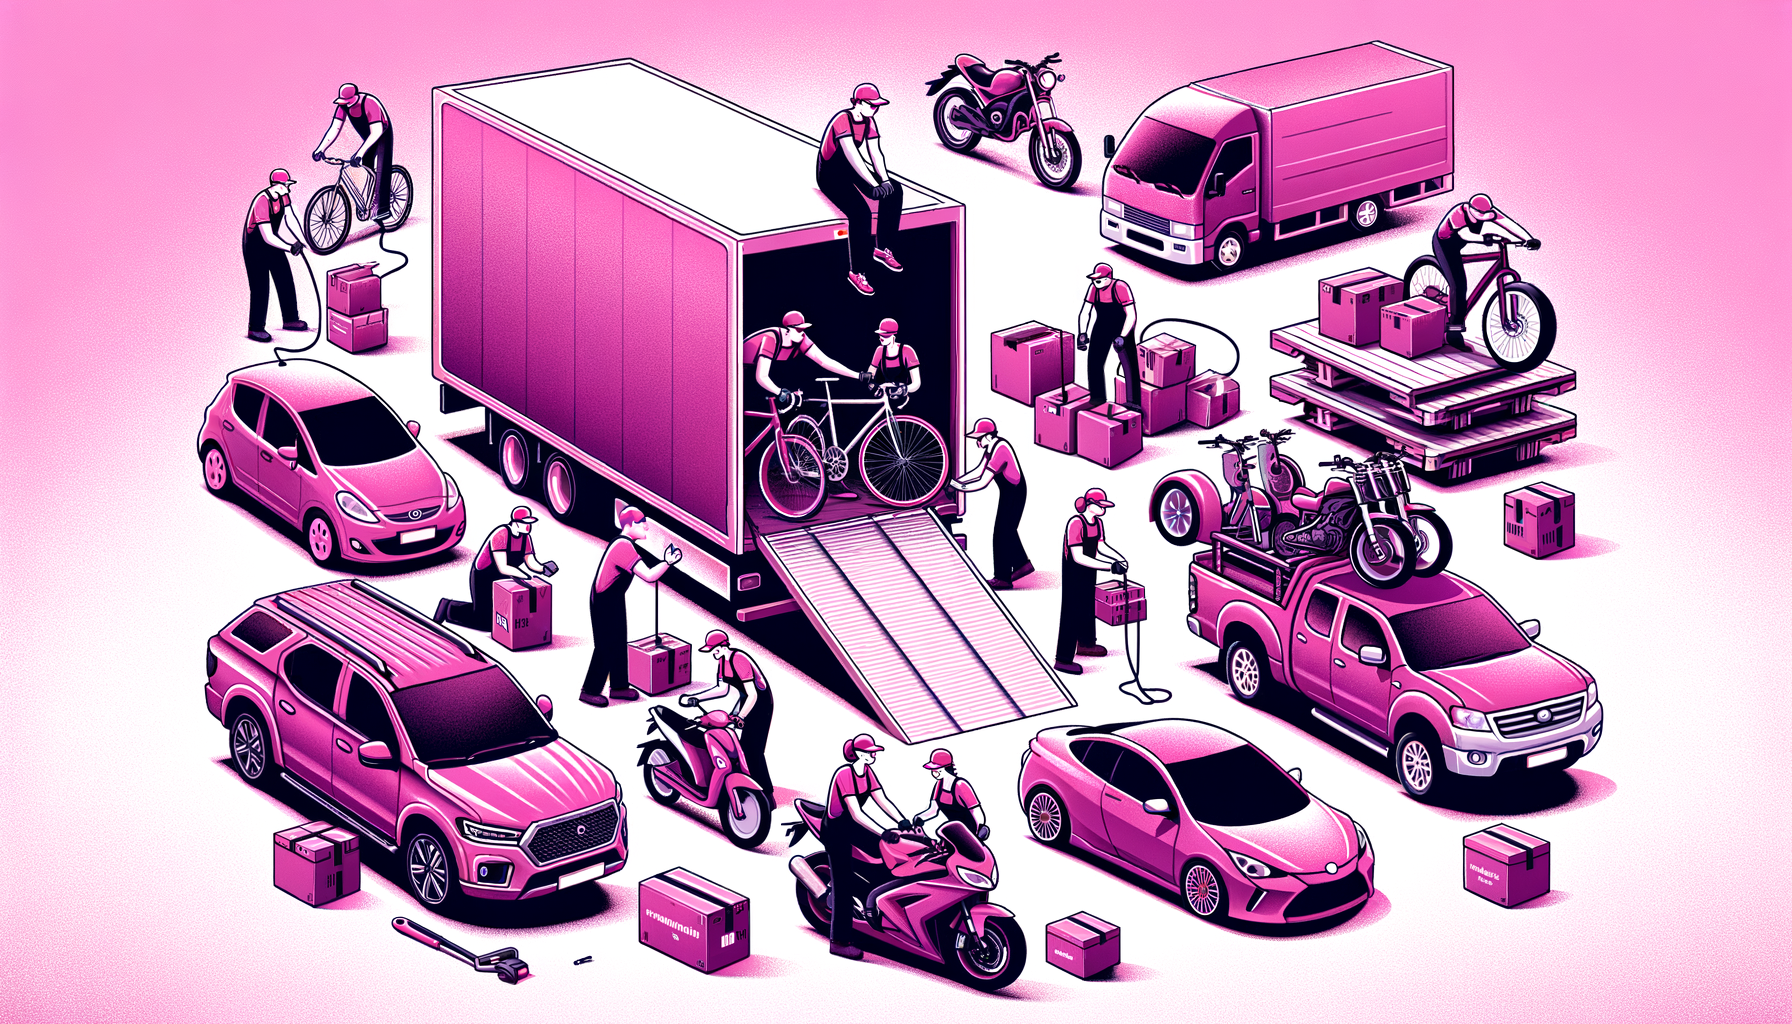 Cartoon image of a bright fuschia car confidently secured on a transport truck, emphasizing reliable vehicle moving.